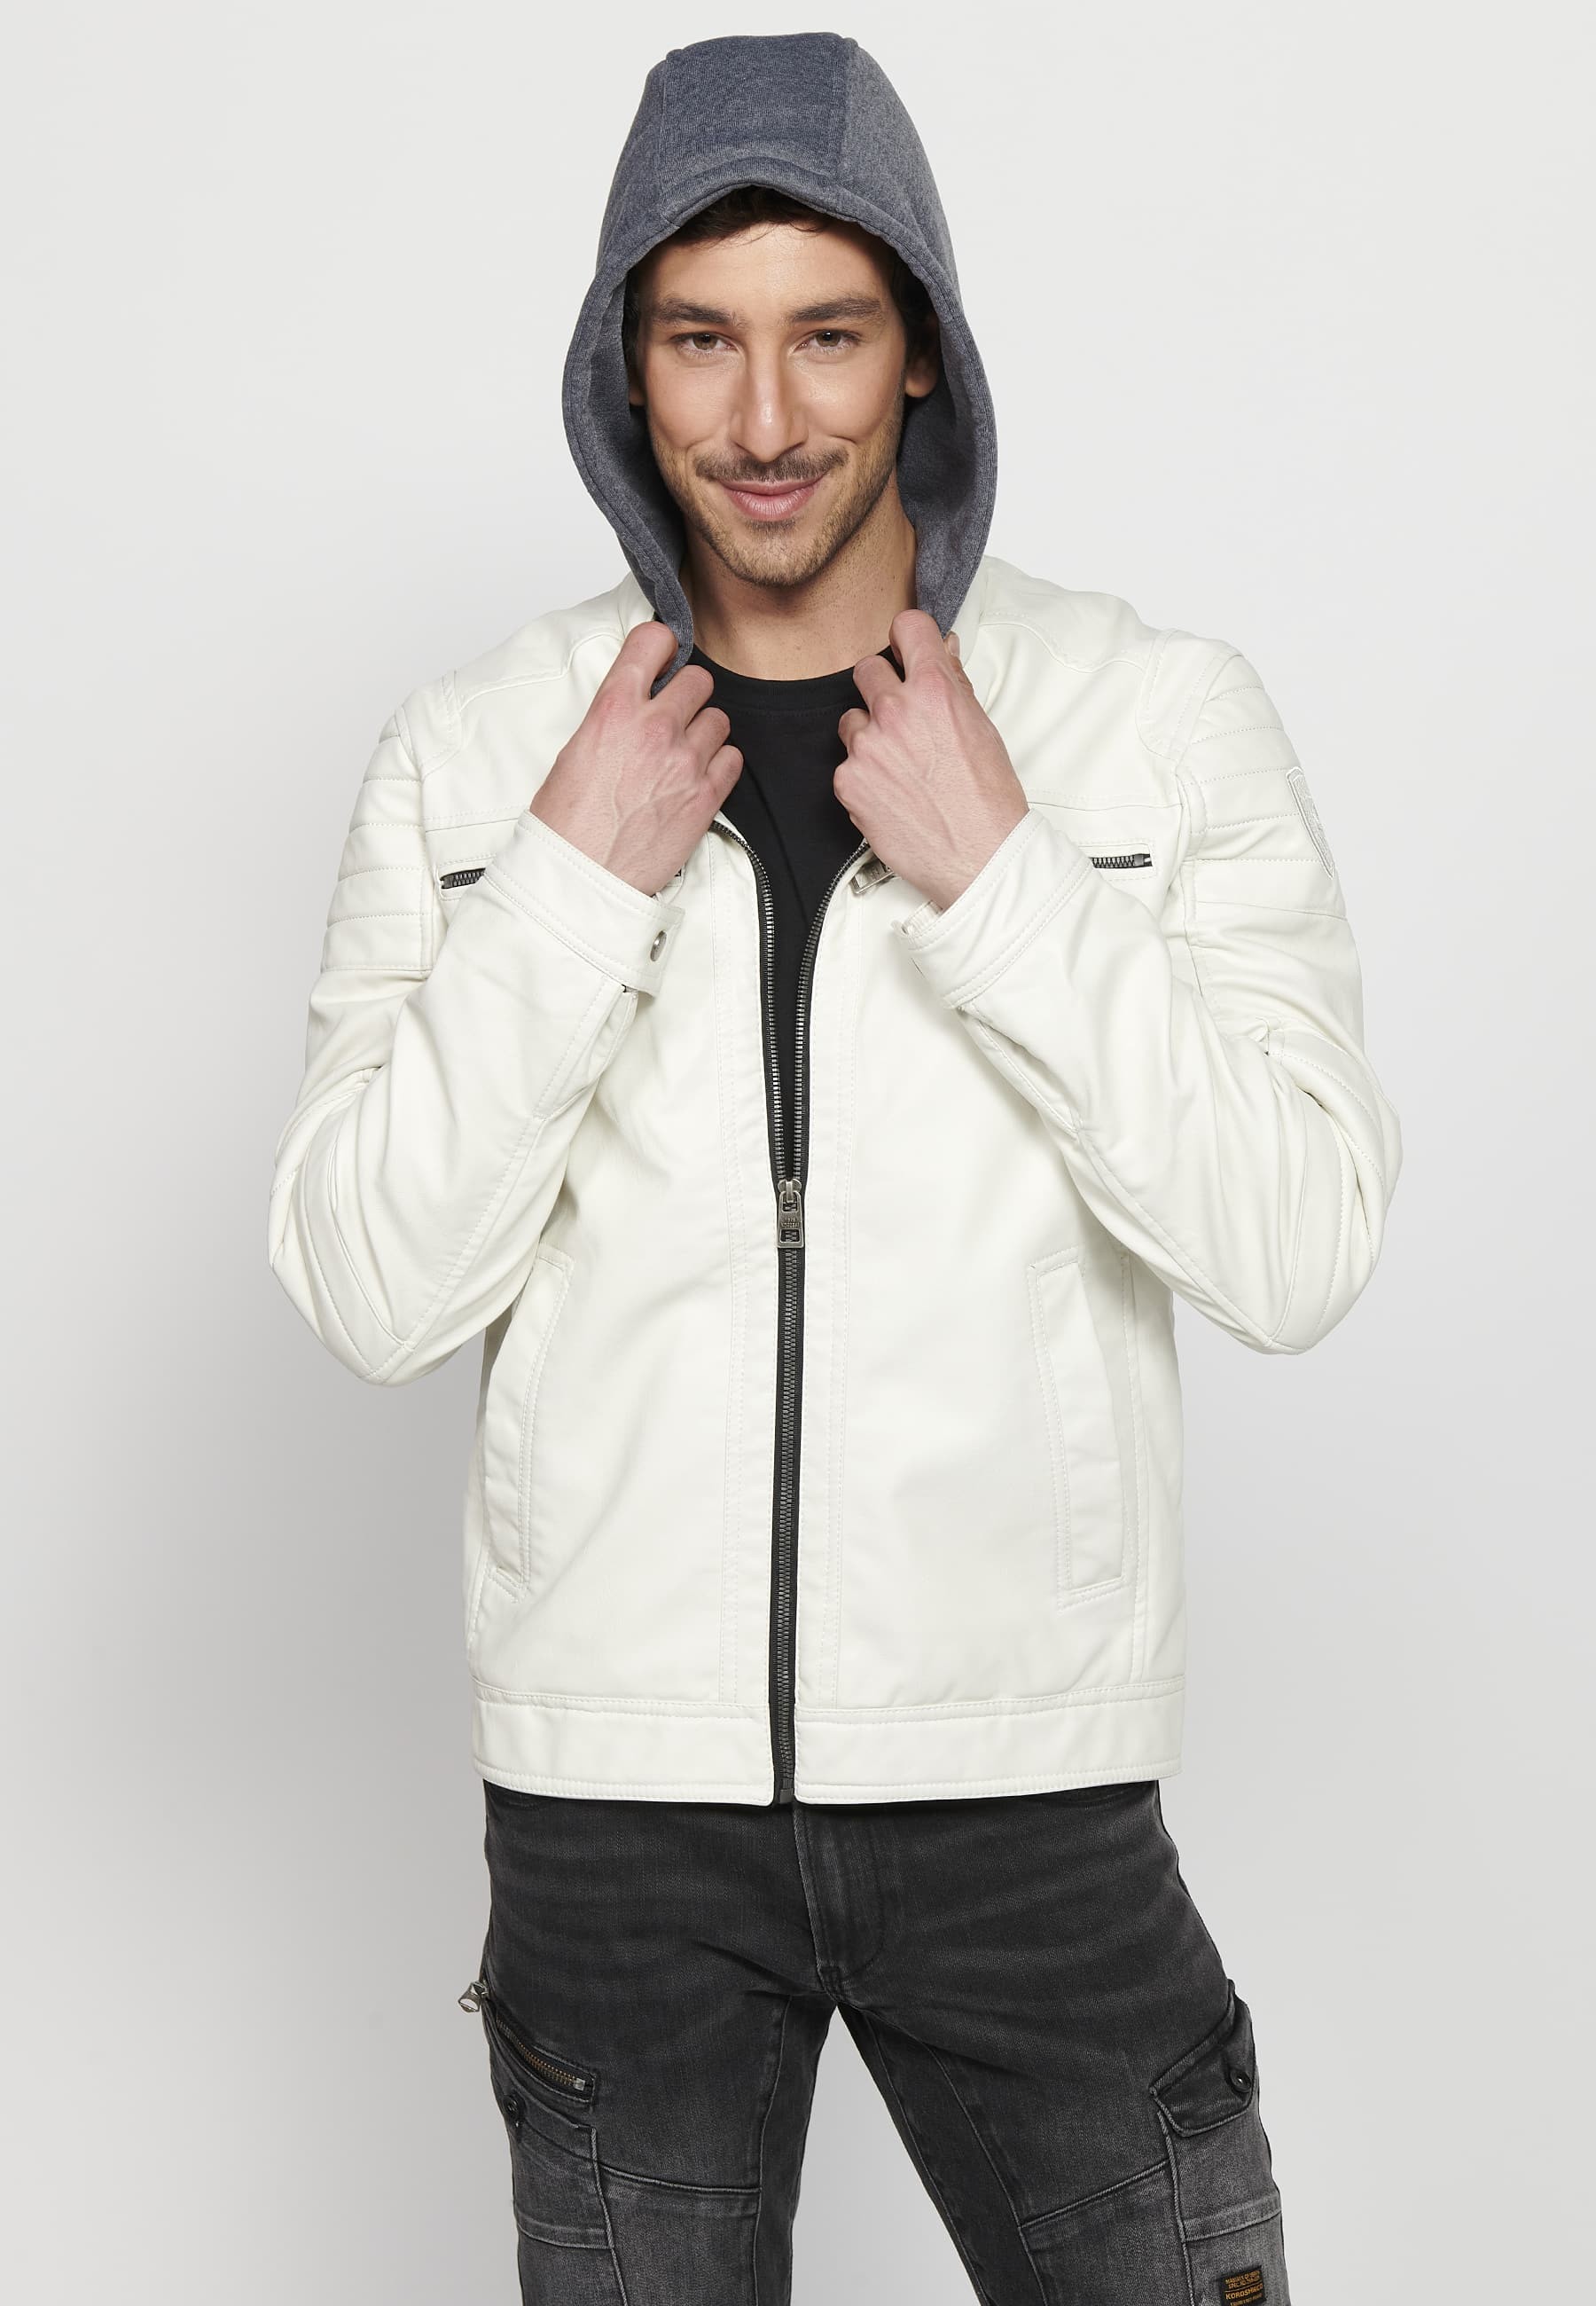 Long-sleeved jacket with zipper front closure and adjustable detachable hooded collar with drawstring in Ecru for Men 9